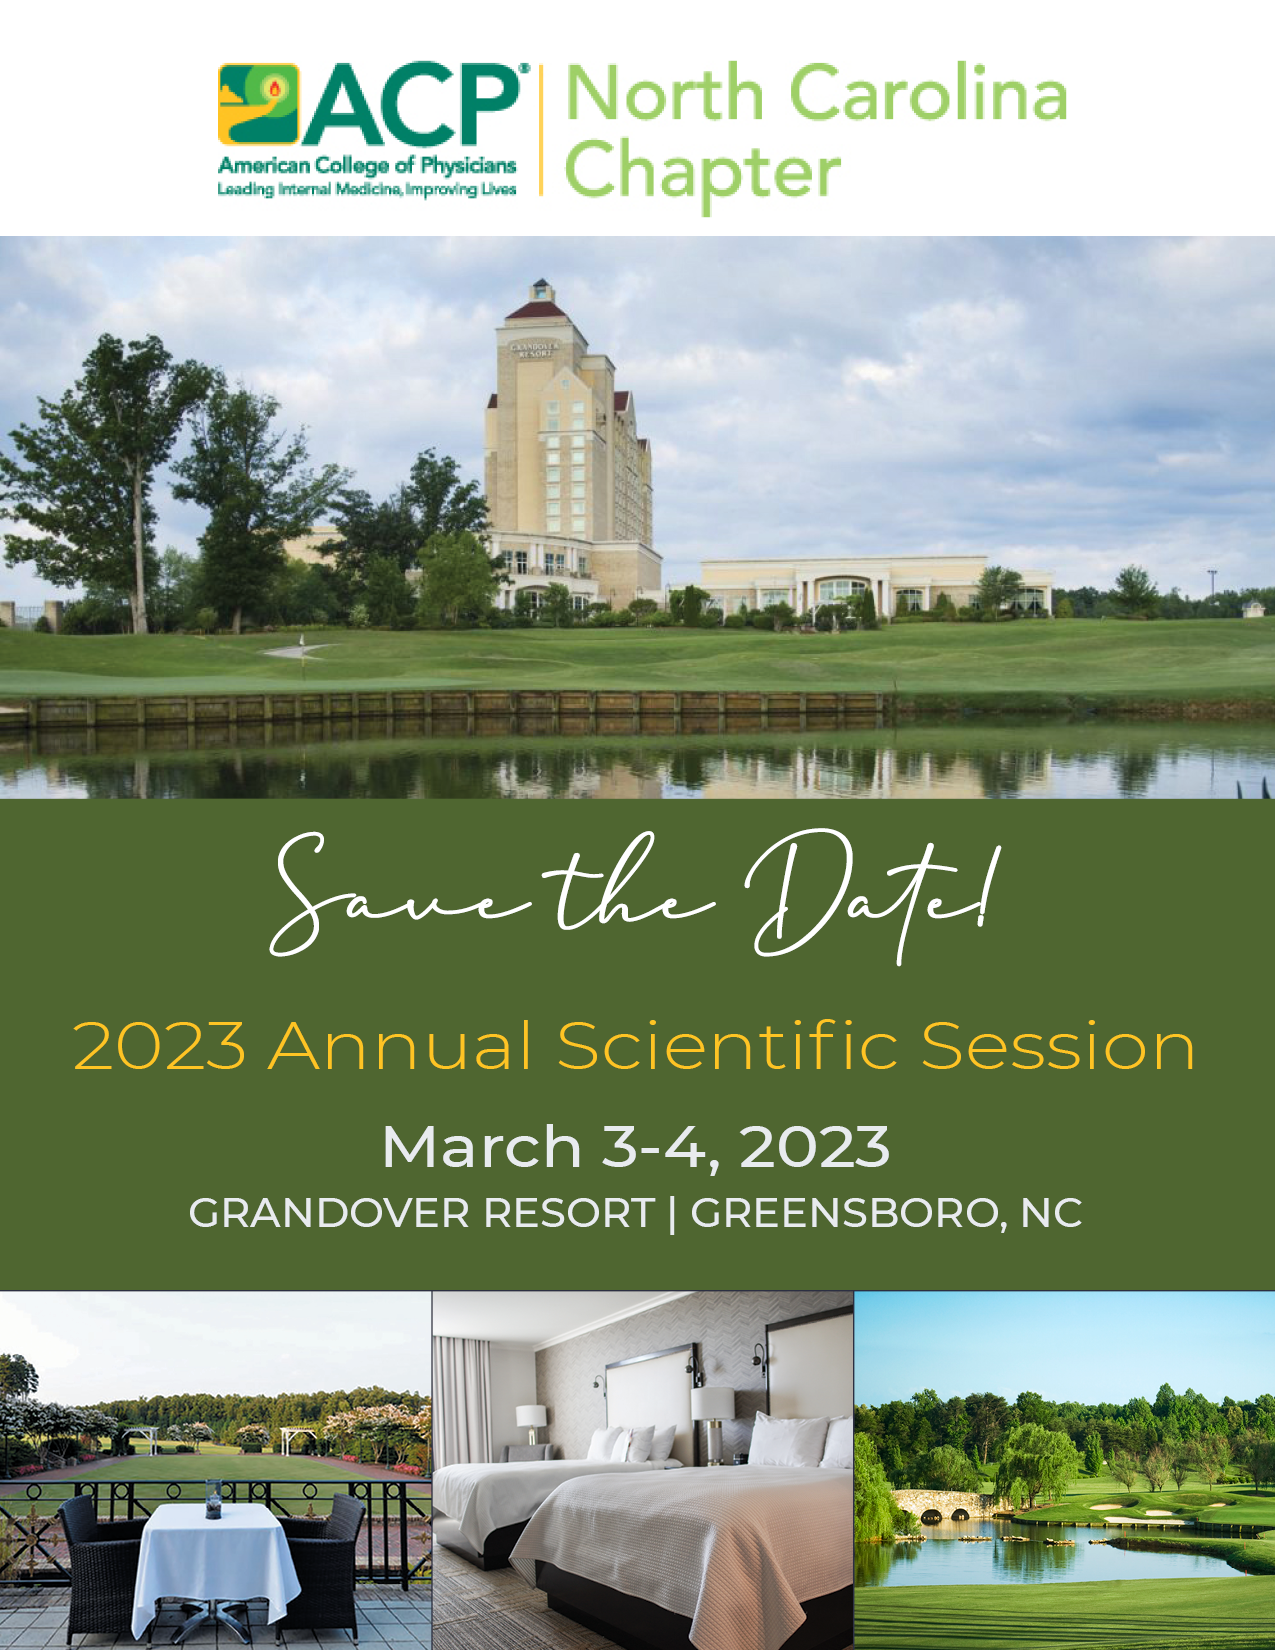 Save the date for the 2023 NC-ACP Annual Scientific Session